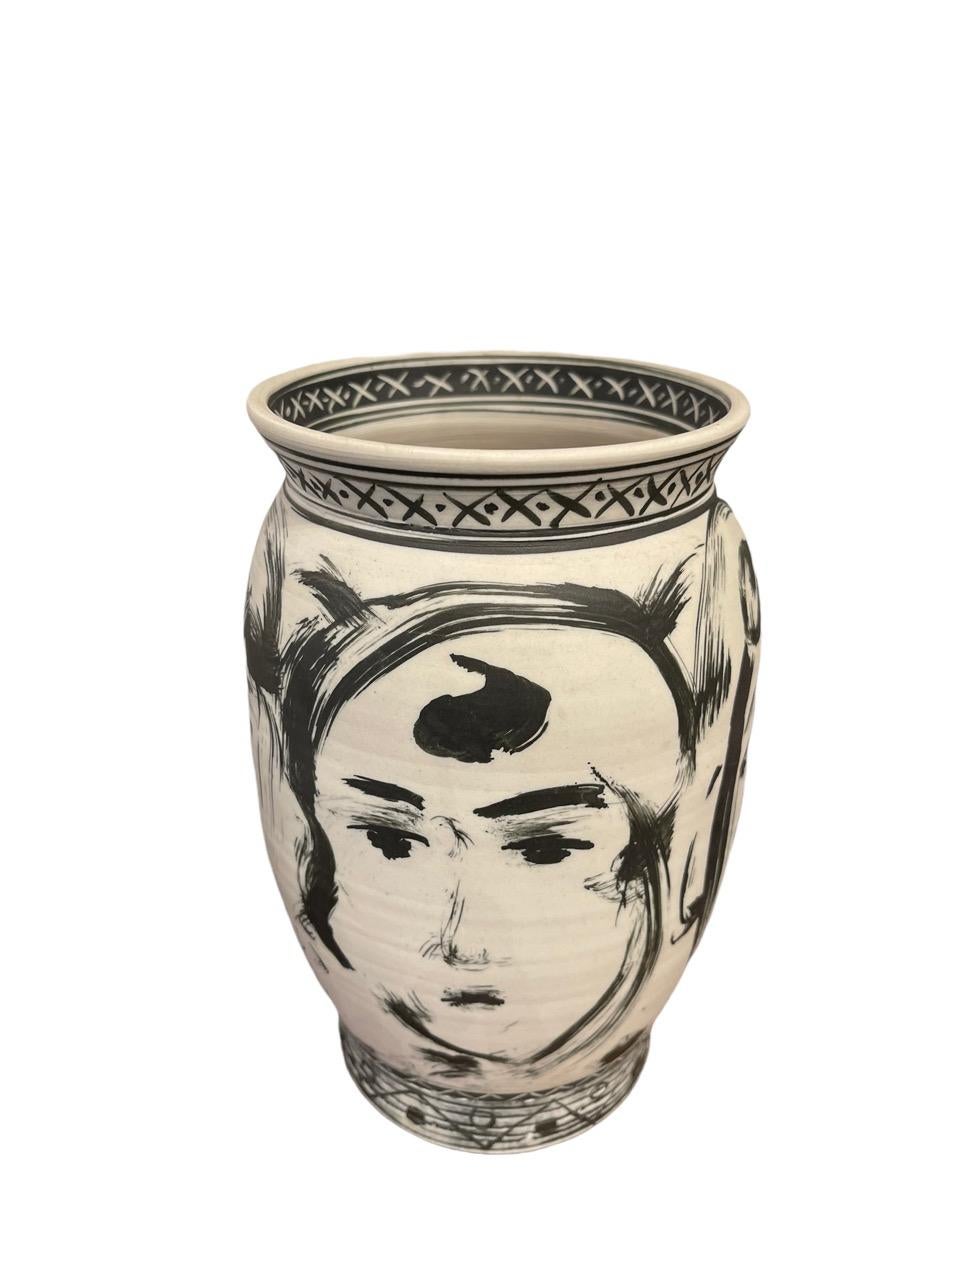 Four Faces (1993) - Porcelain and terra sigillata vase, signed, titled and dated on bottom, by artist Edward Eberle, (American/Western PA, born 1944). 
 